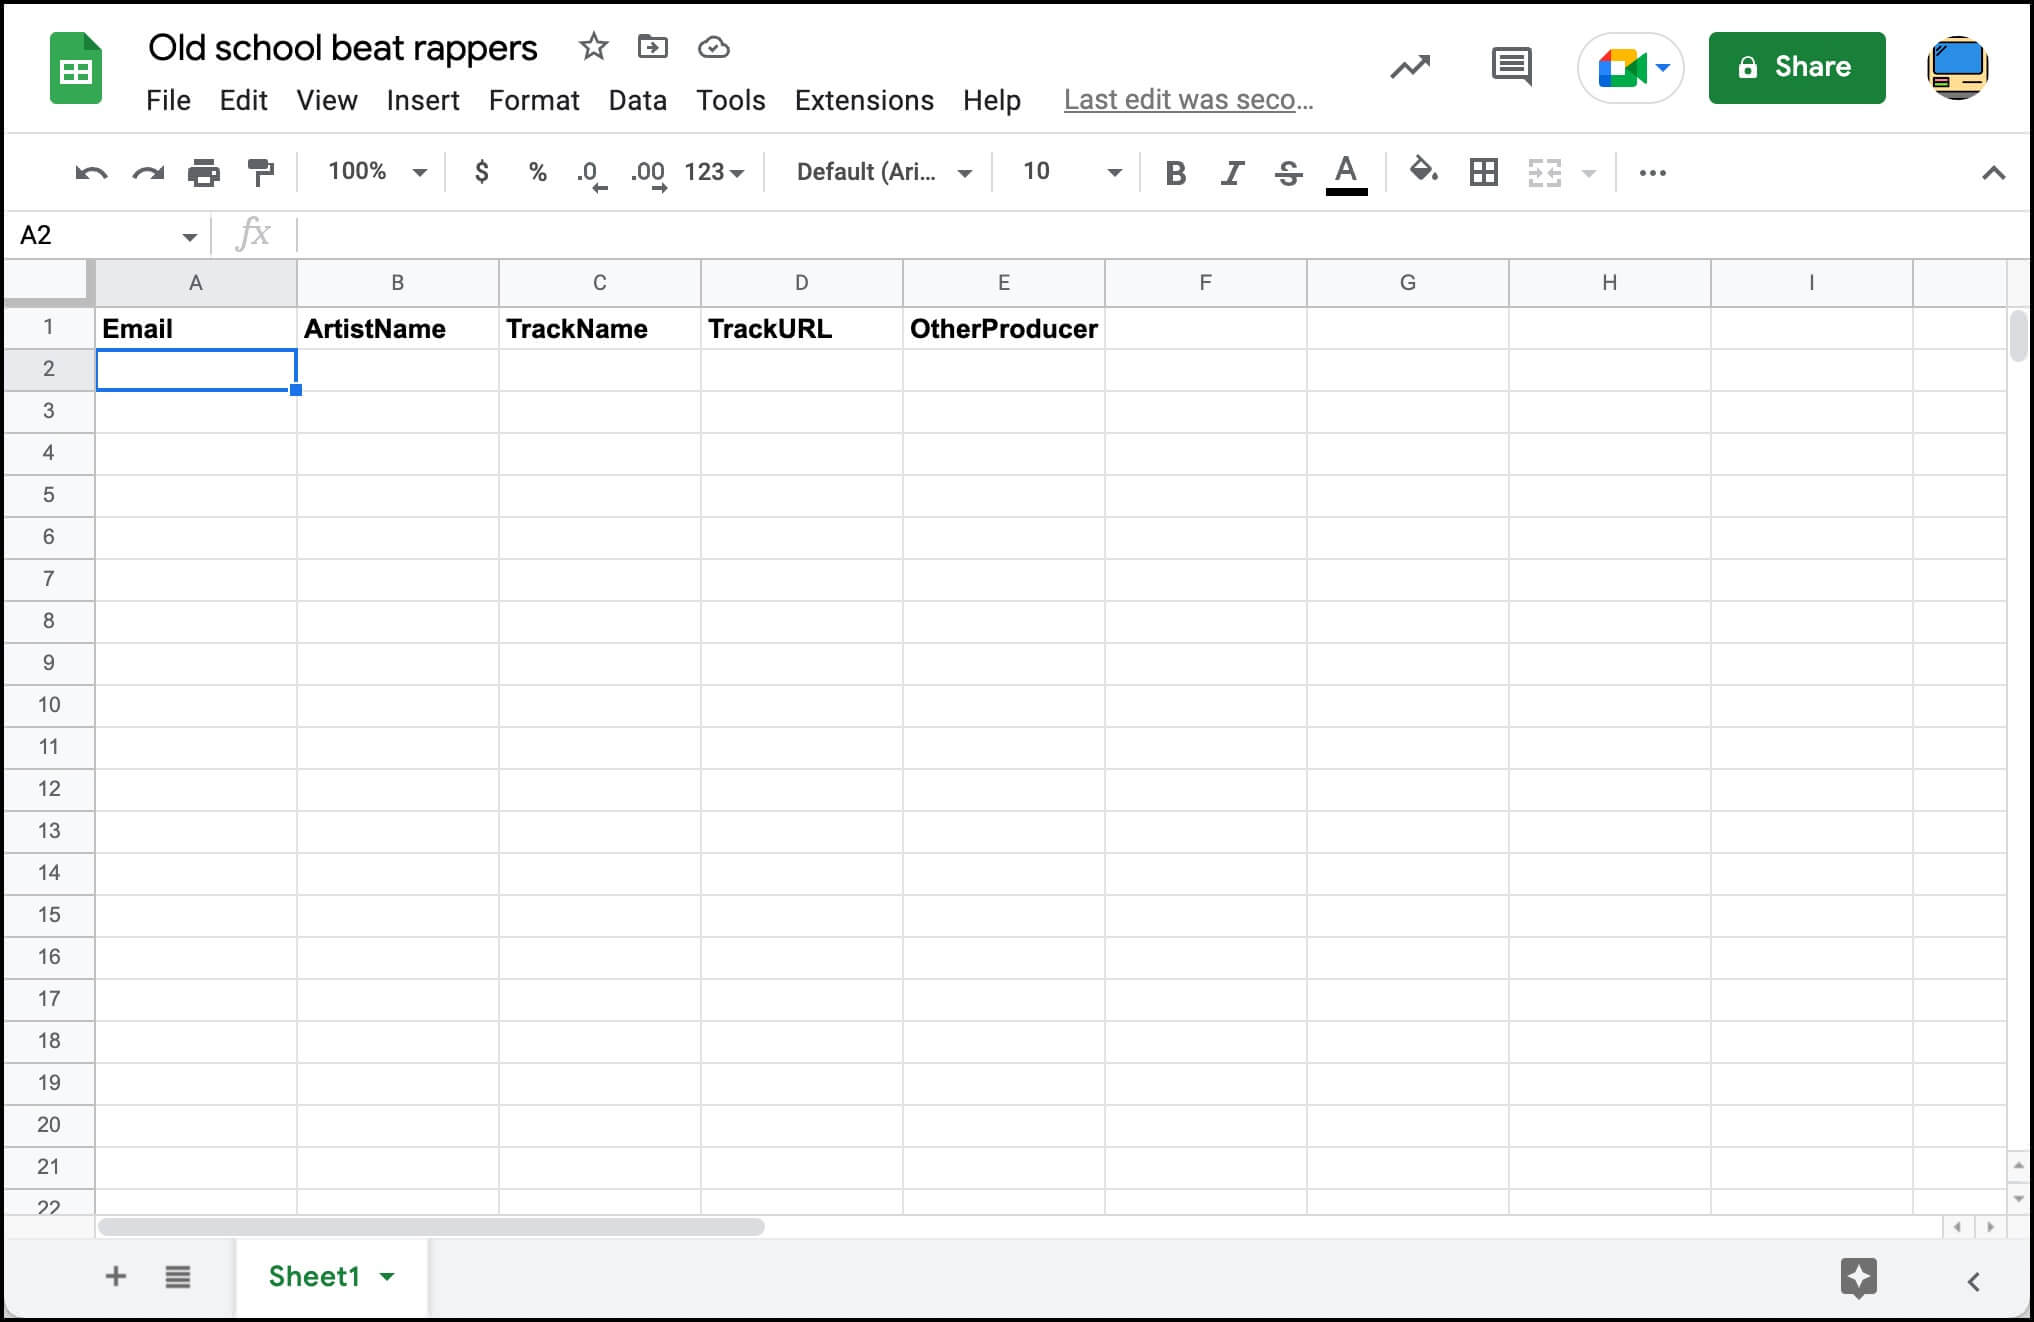 Create a Google Sheet for the rappers you will cold email